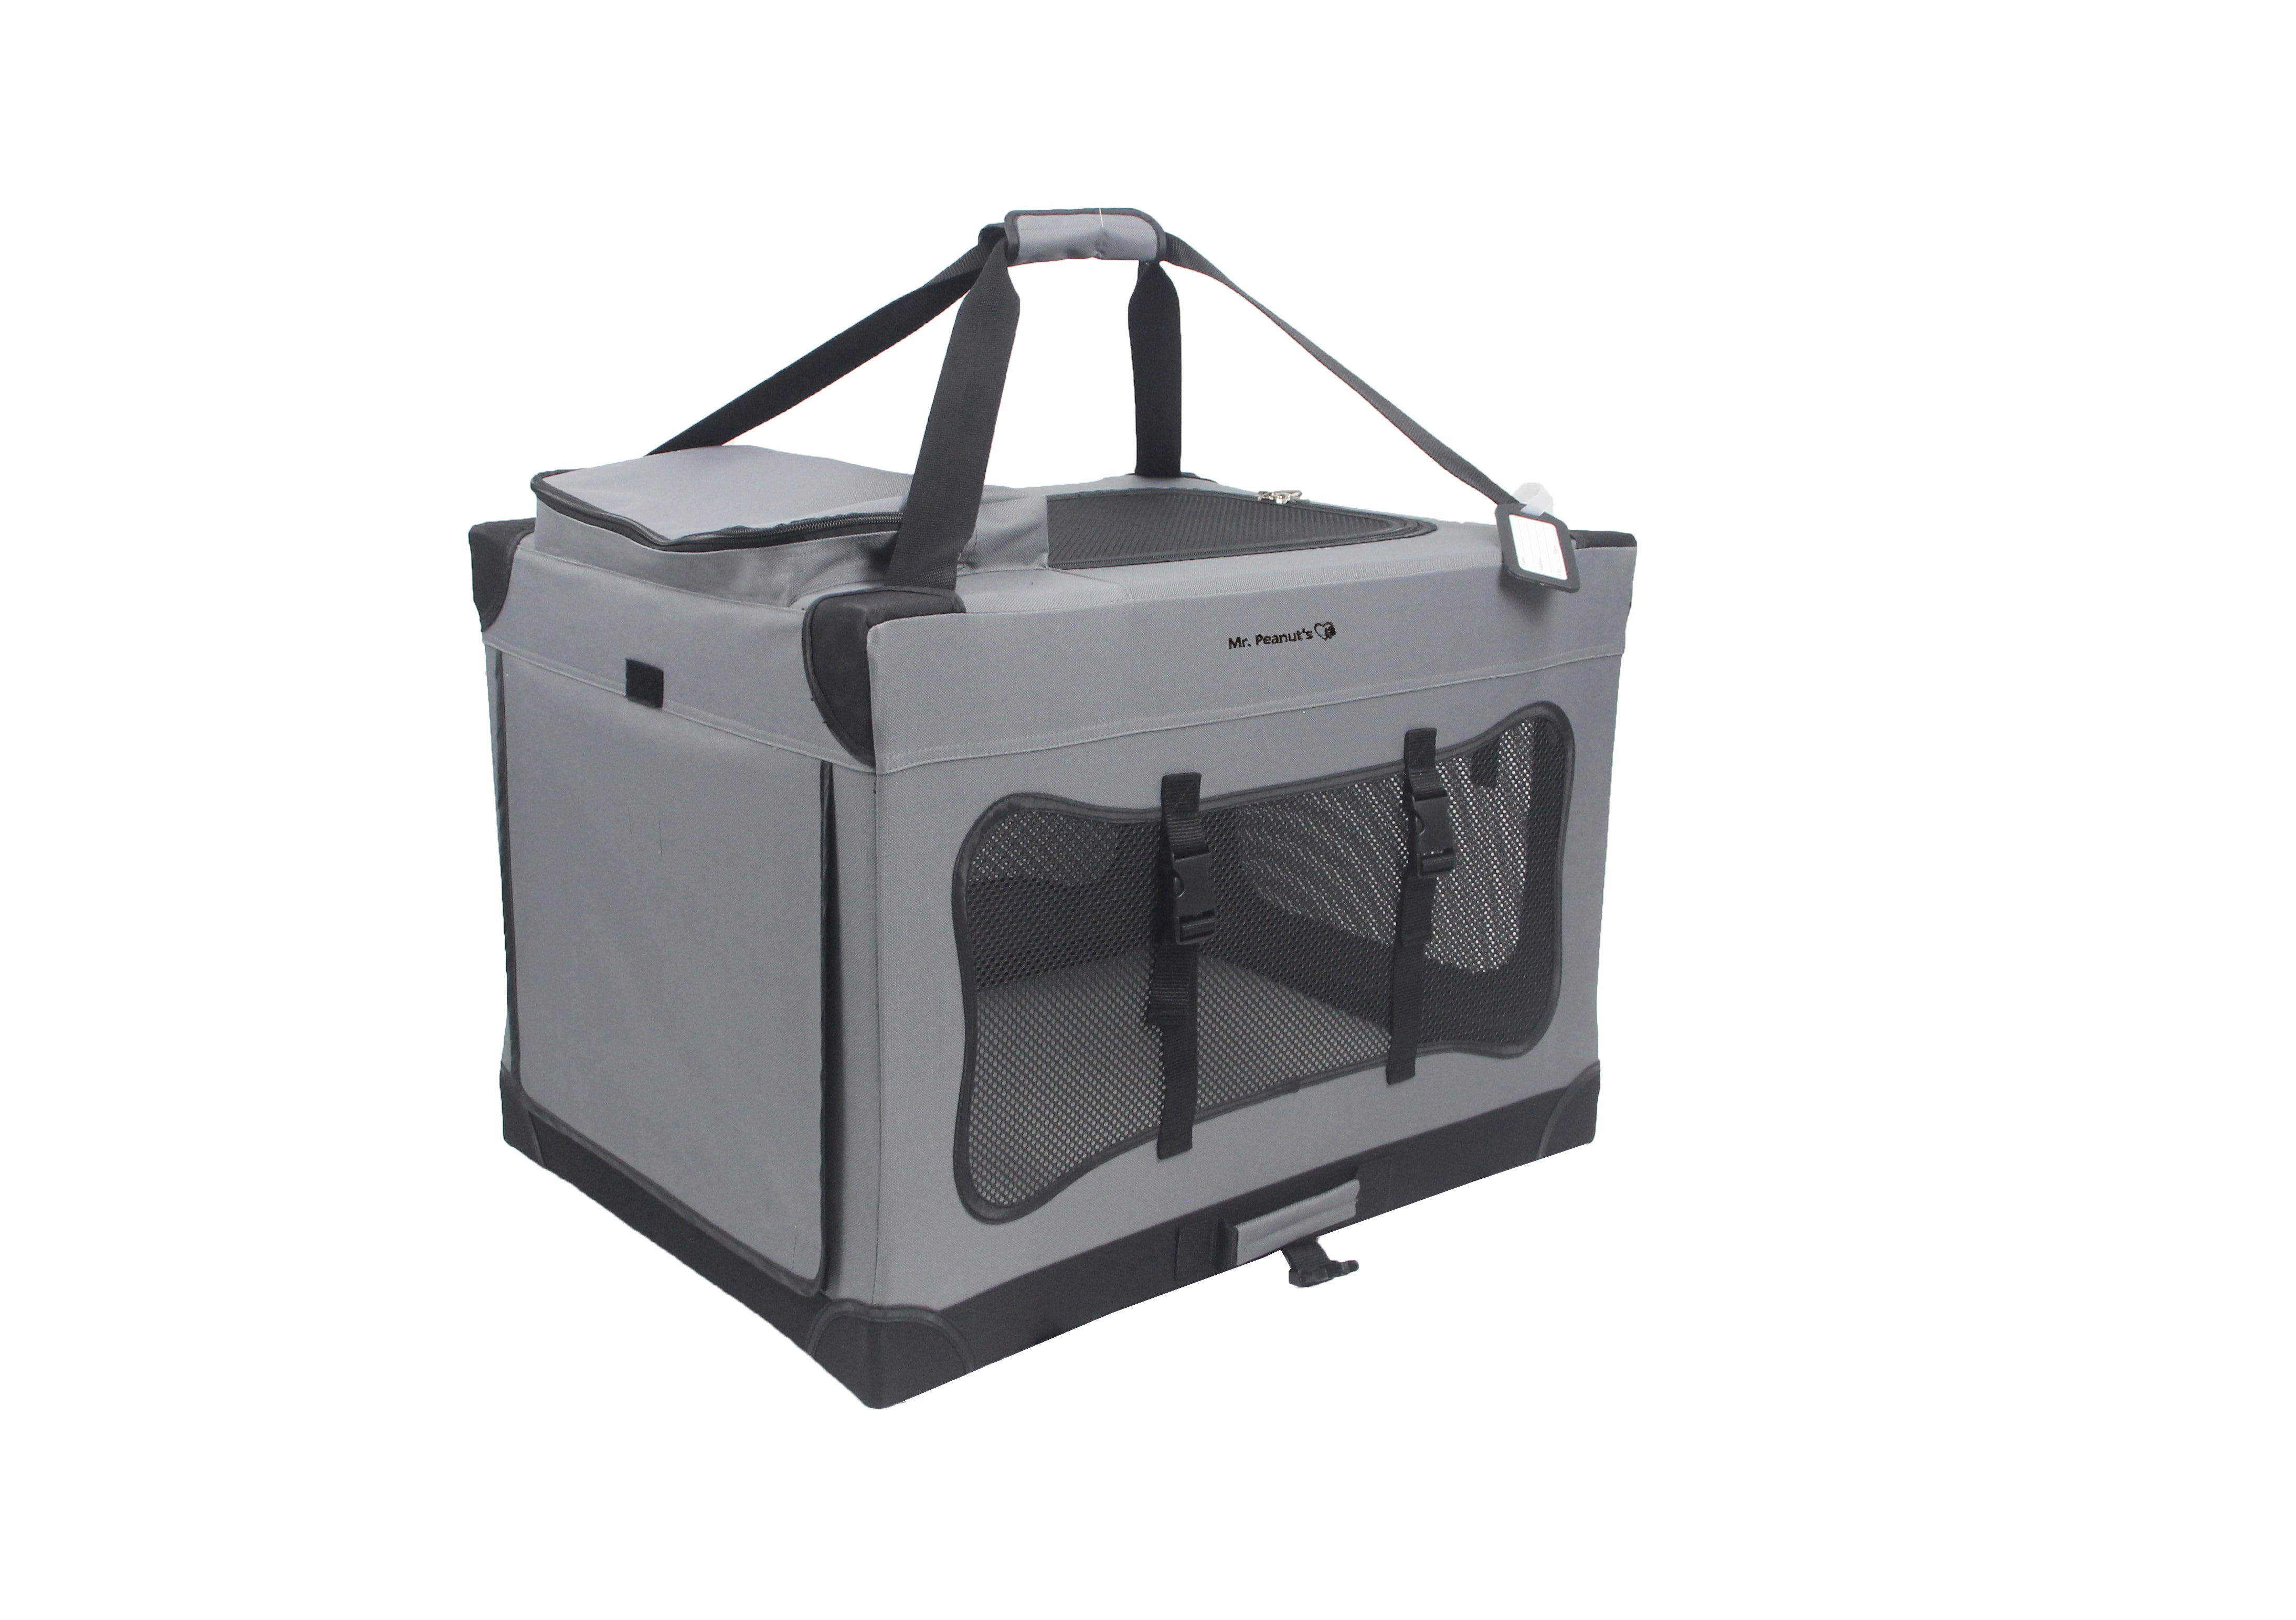 Mirapet USA Pet Carriers - Airline TSA Approved Travel Crates for Cats and Dogs - Collapsible Foldable Design Portable Hard-Side